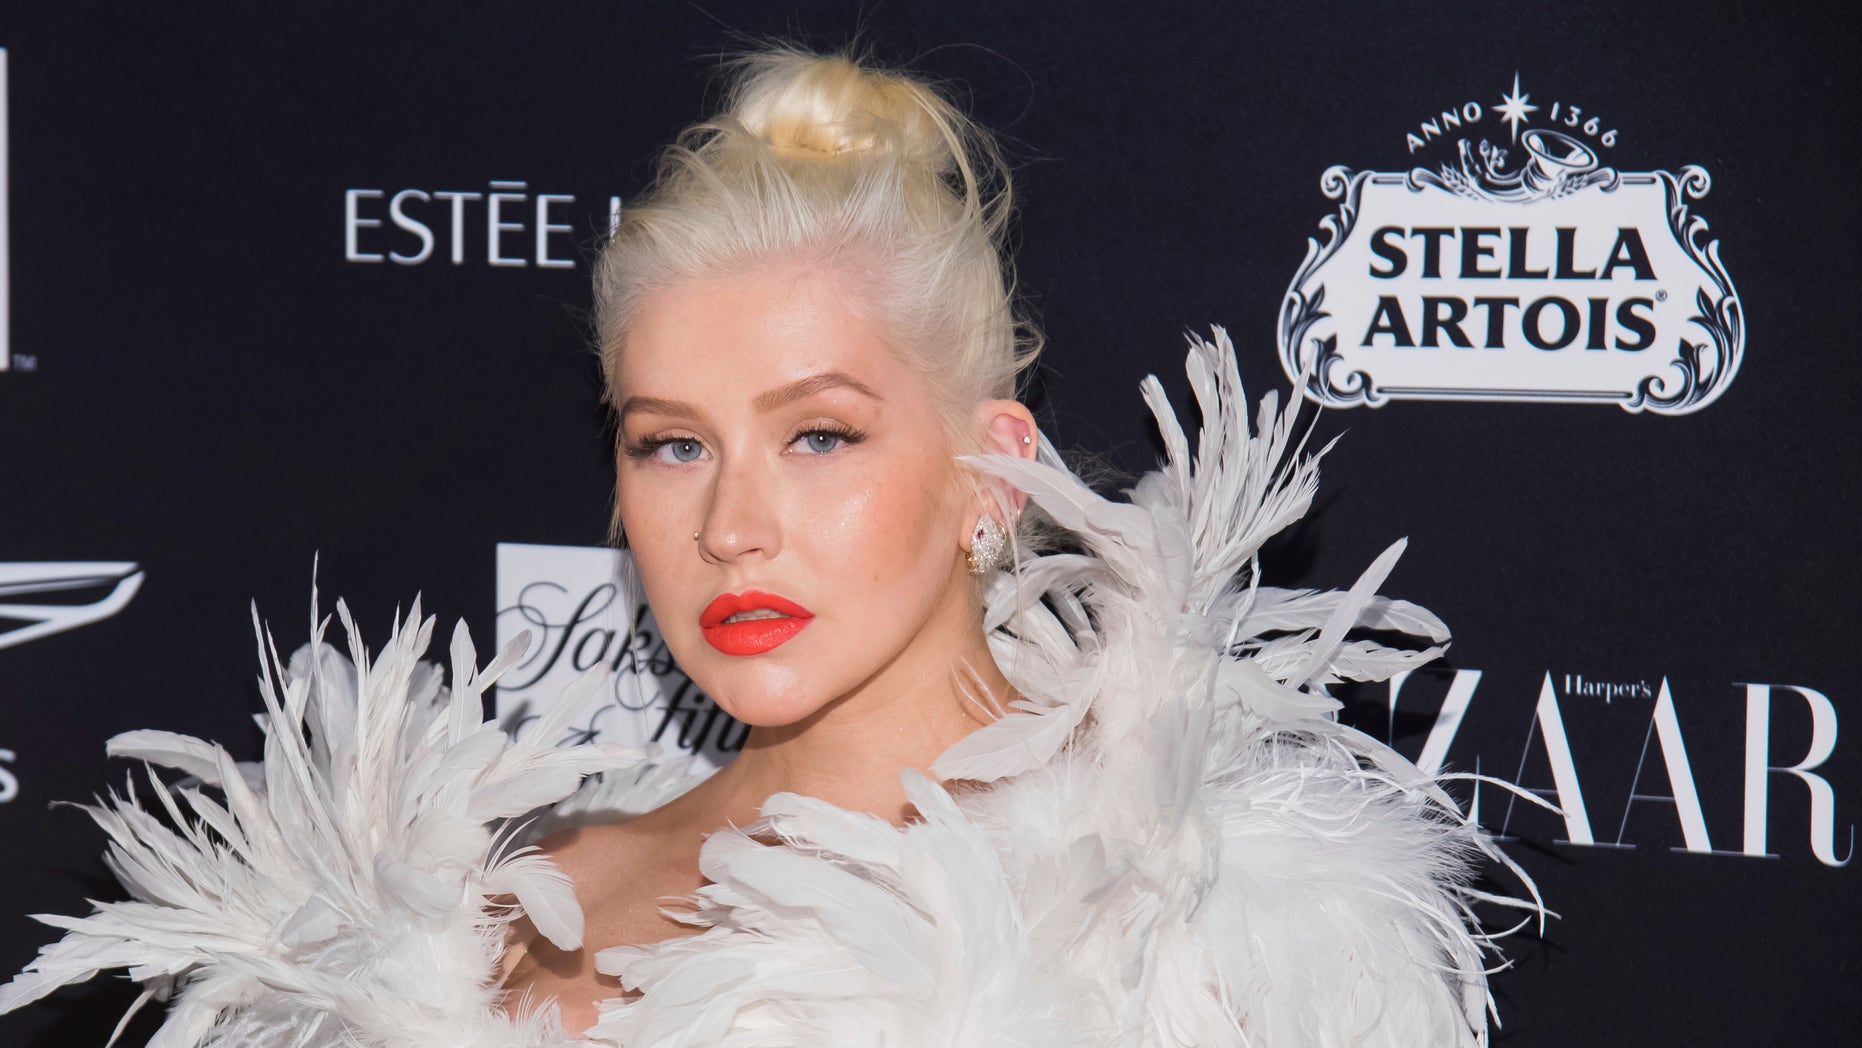 Christina Aguilera set to launch Las Vegas residency in May